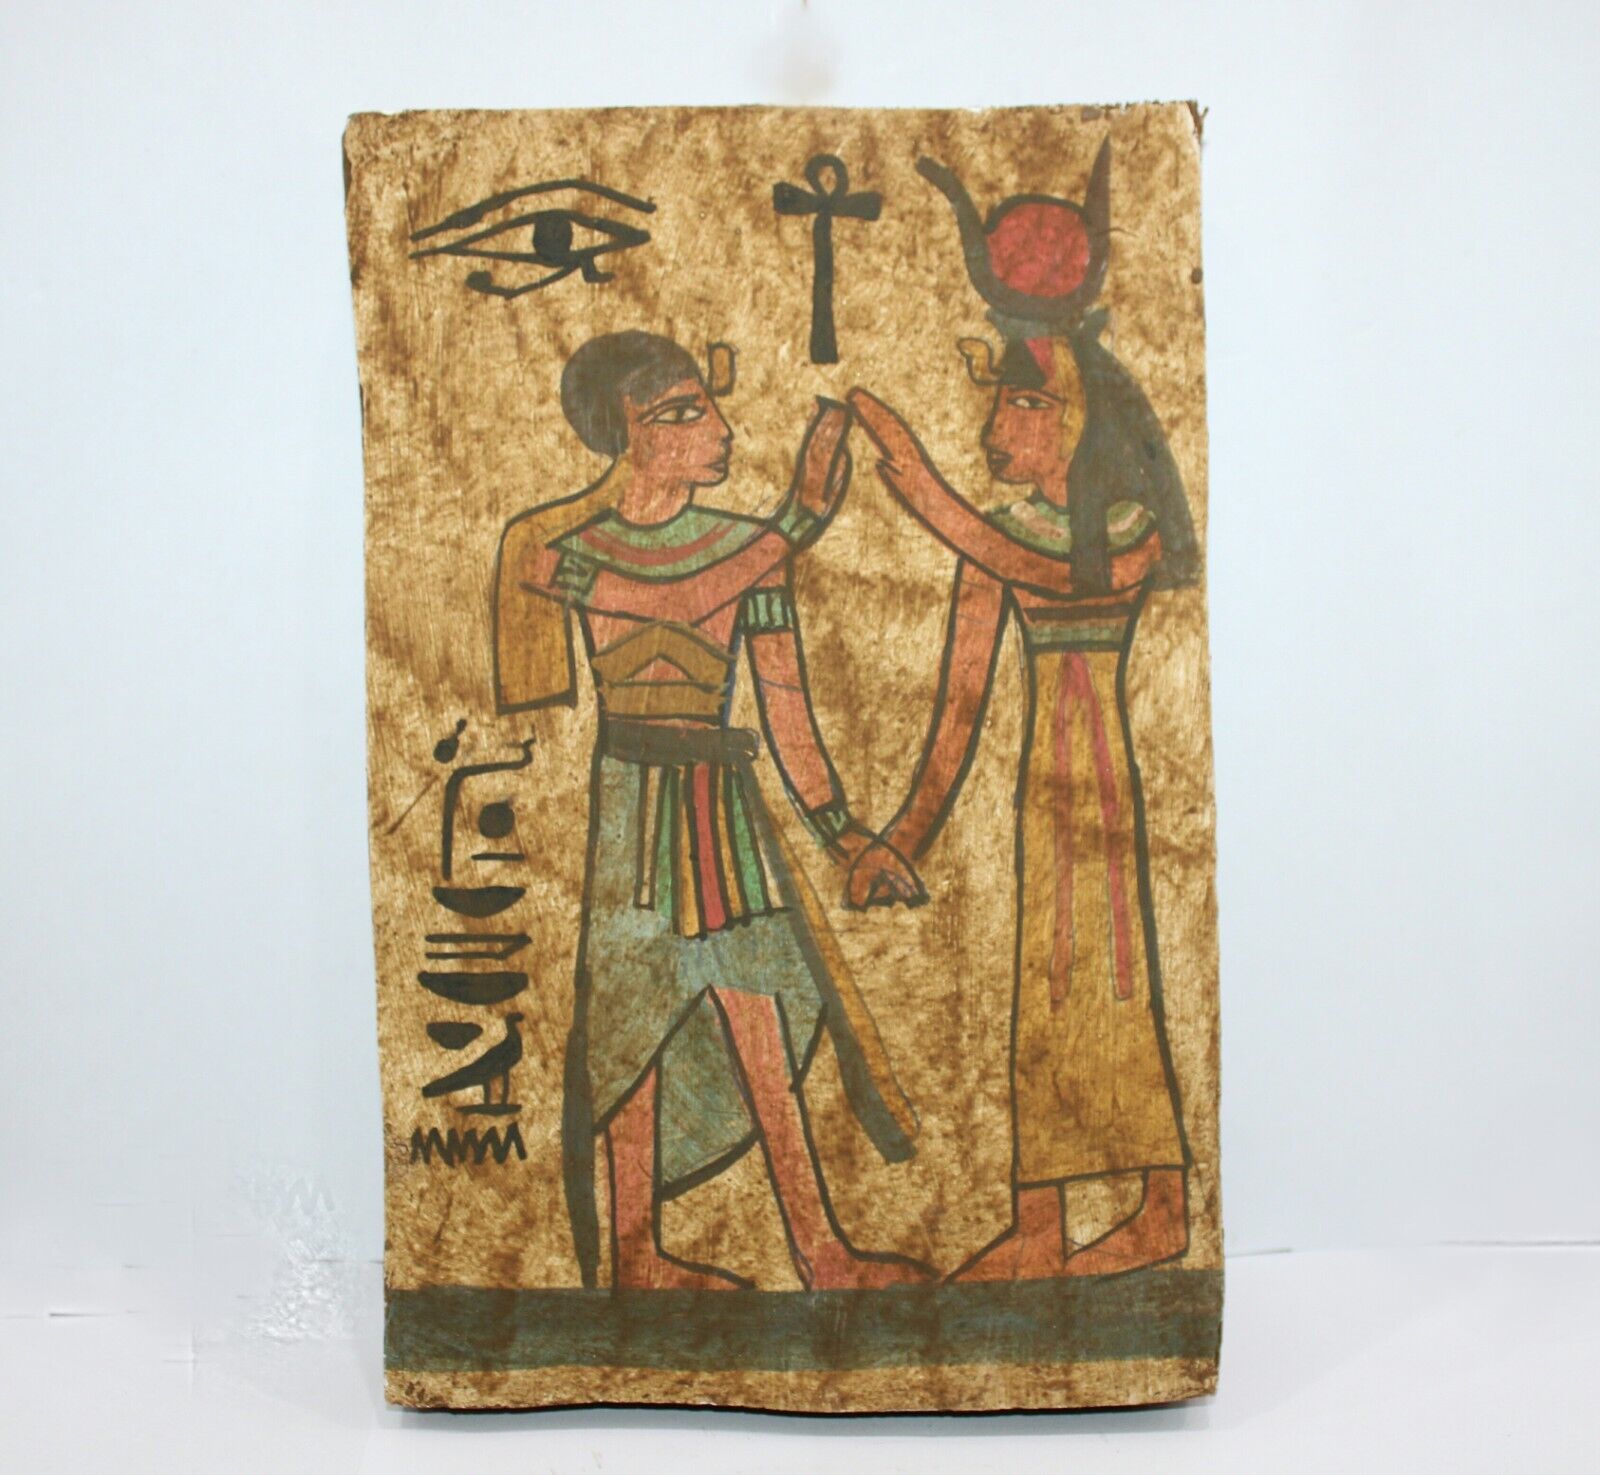 Rare Antique Wall Relief of Ramses II With God Hathor In Egyptian Mythology